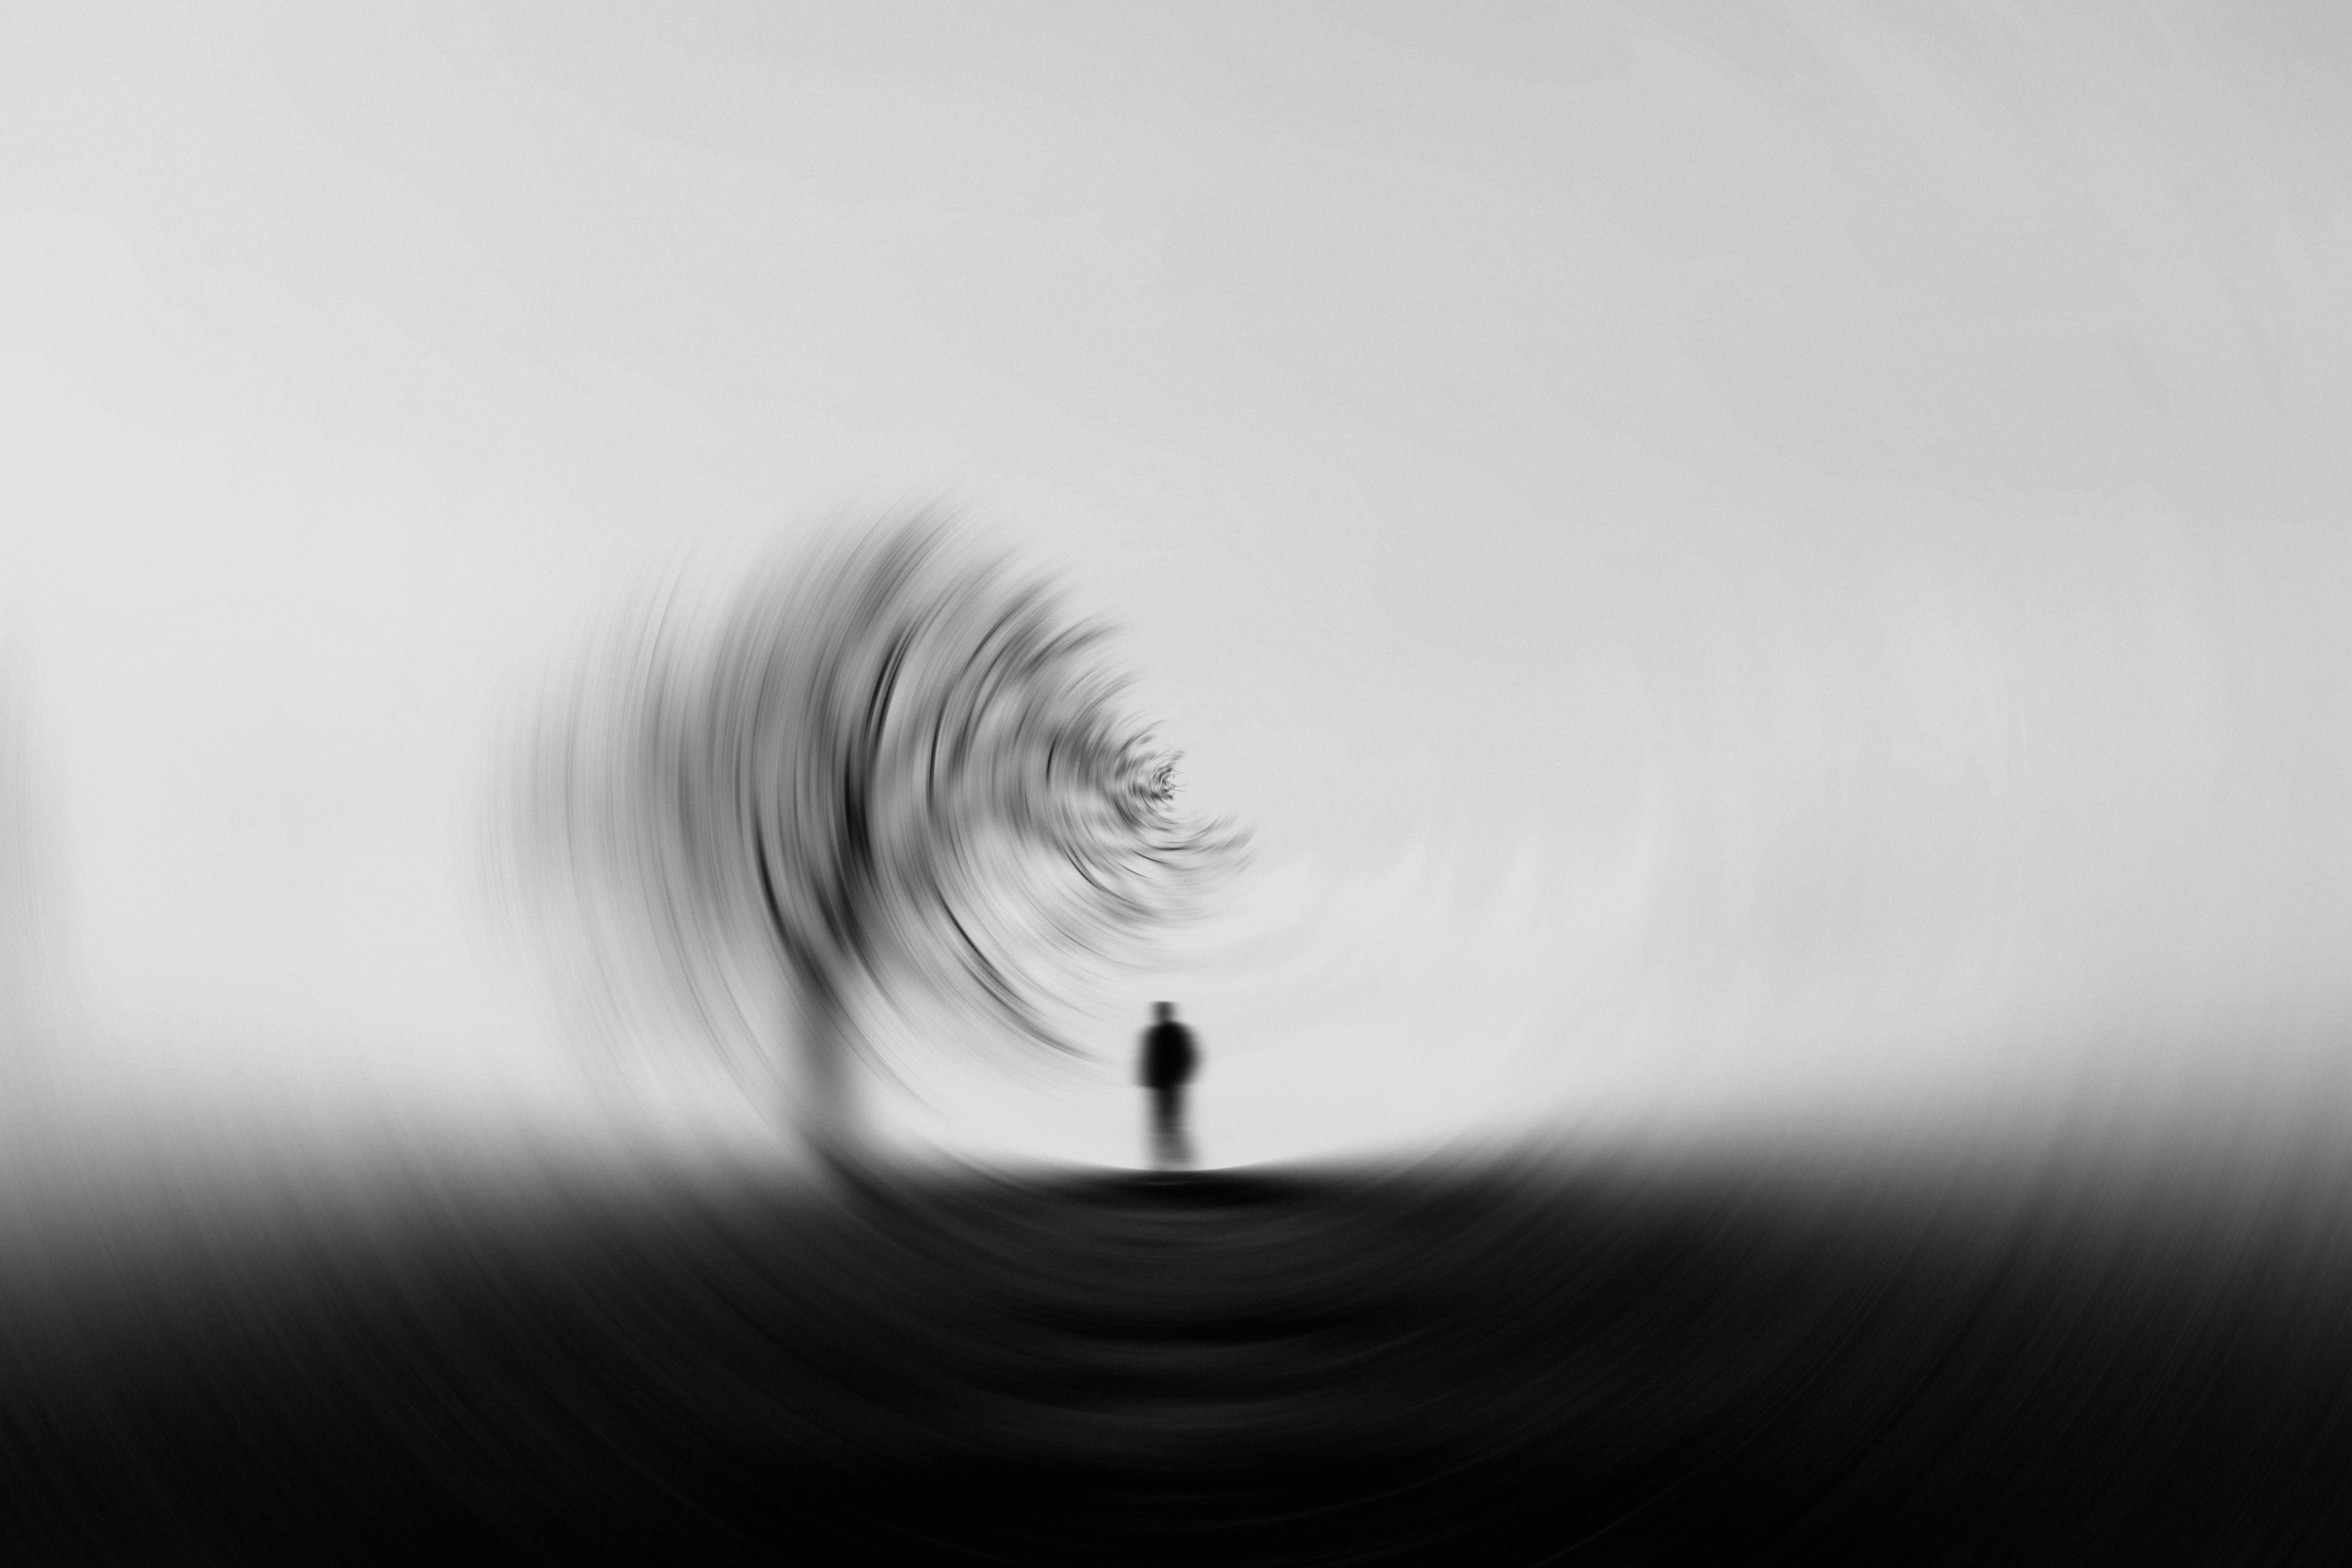 miscellanea, chb, bw, blur, smooth, miscellaneous, effect, tree, wood, silhouette cell phone wallpapers